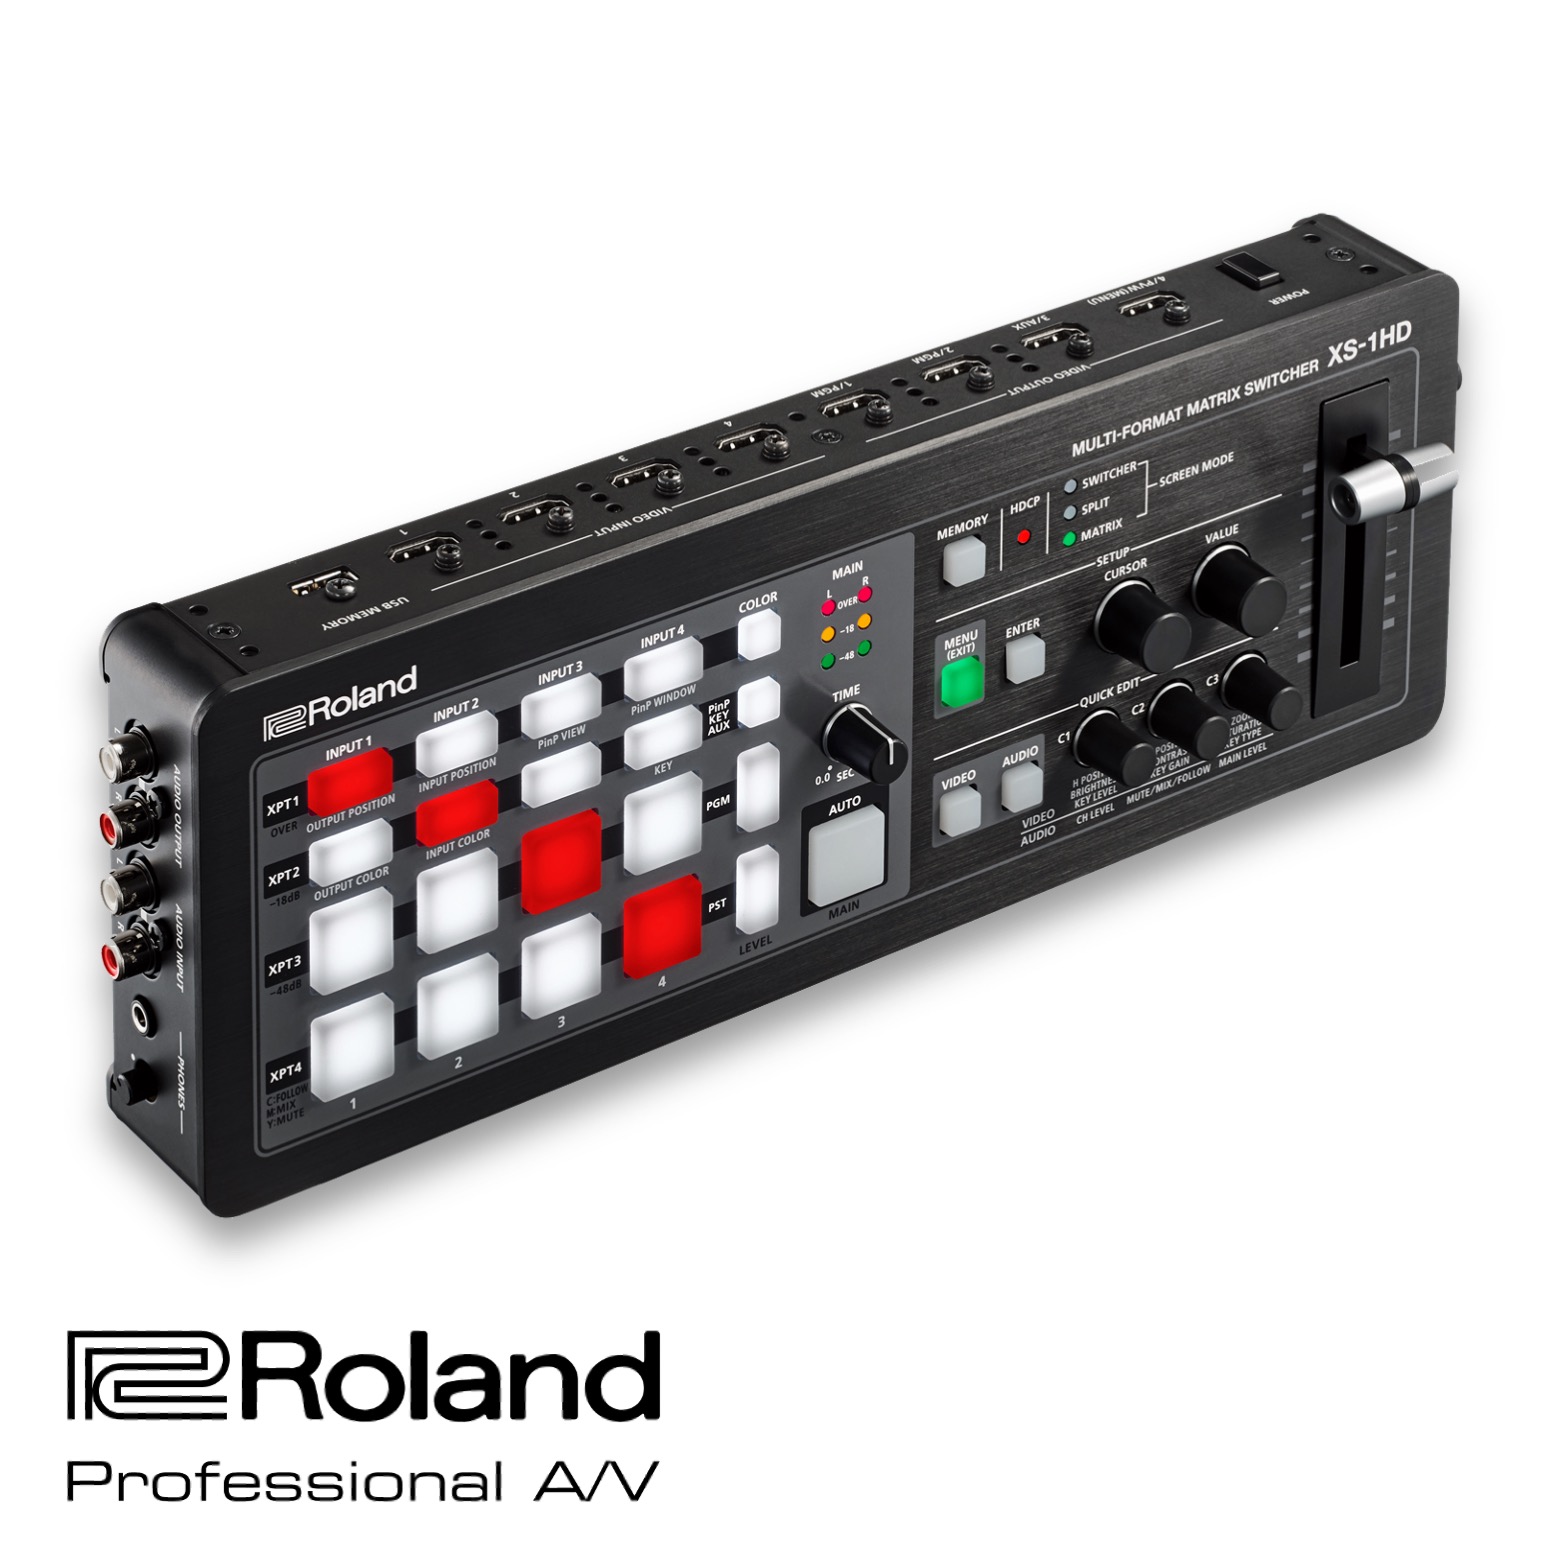 Roland XS-83H 8x3 Multi-Format Matrix Switch: HDMI or HDBaseT Out & iPad  Control - Conference Room AV